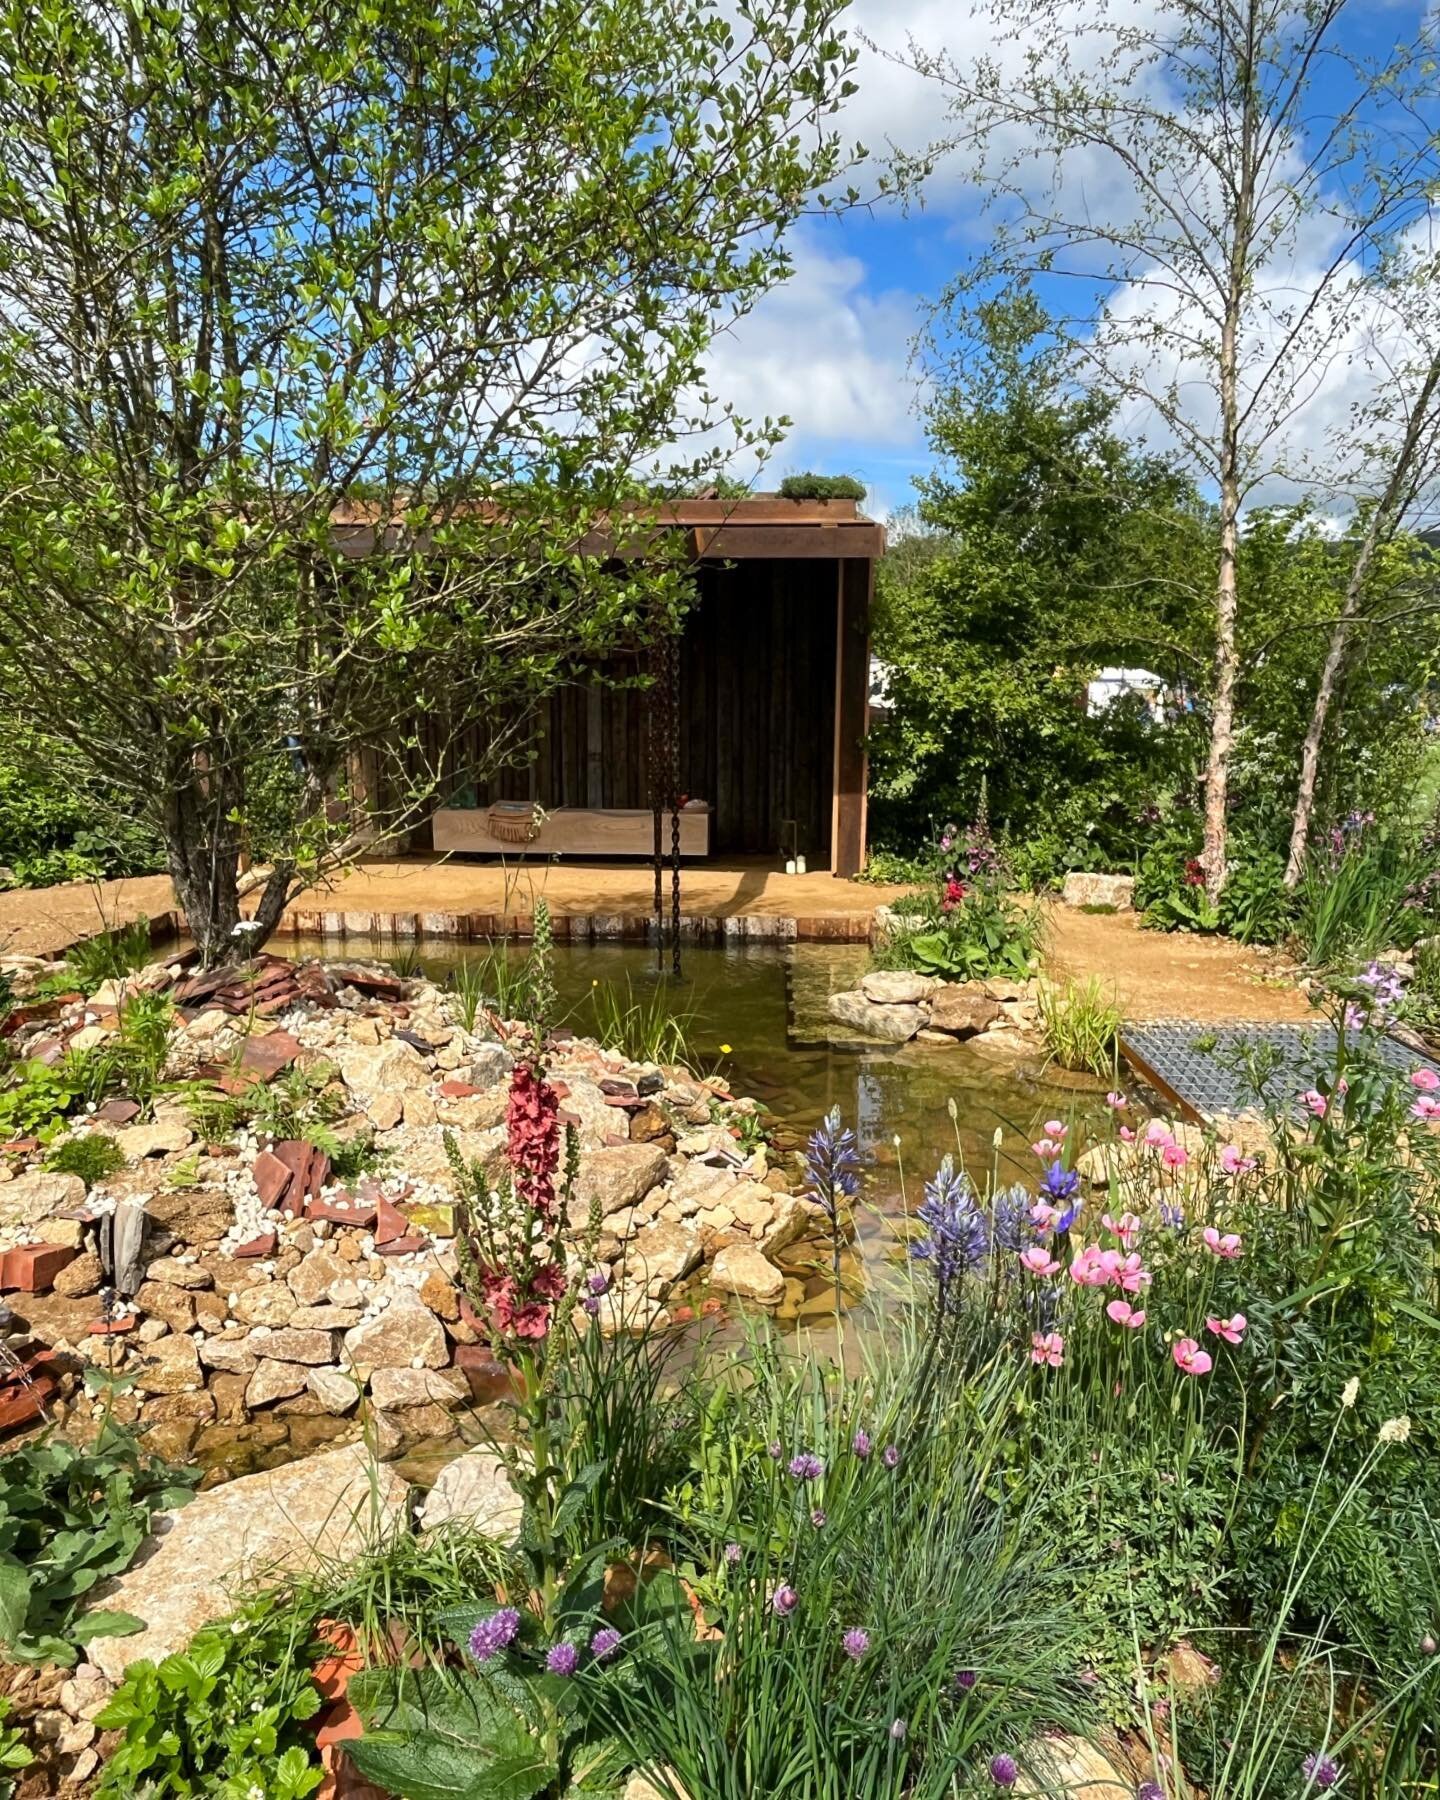 Beautiful garden by @jamielanglandsgardens sponsored by @thewildlifetrusts at @rhsmalvern has won Gold, Best in Show and Best Construction 👌👏 #showgarden #gardendesign #gardenphotography #wildlifegarden #sustainable @the_rhs @3countiesshows